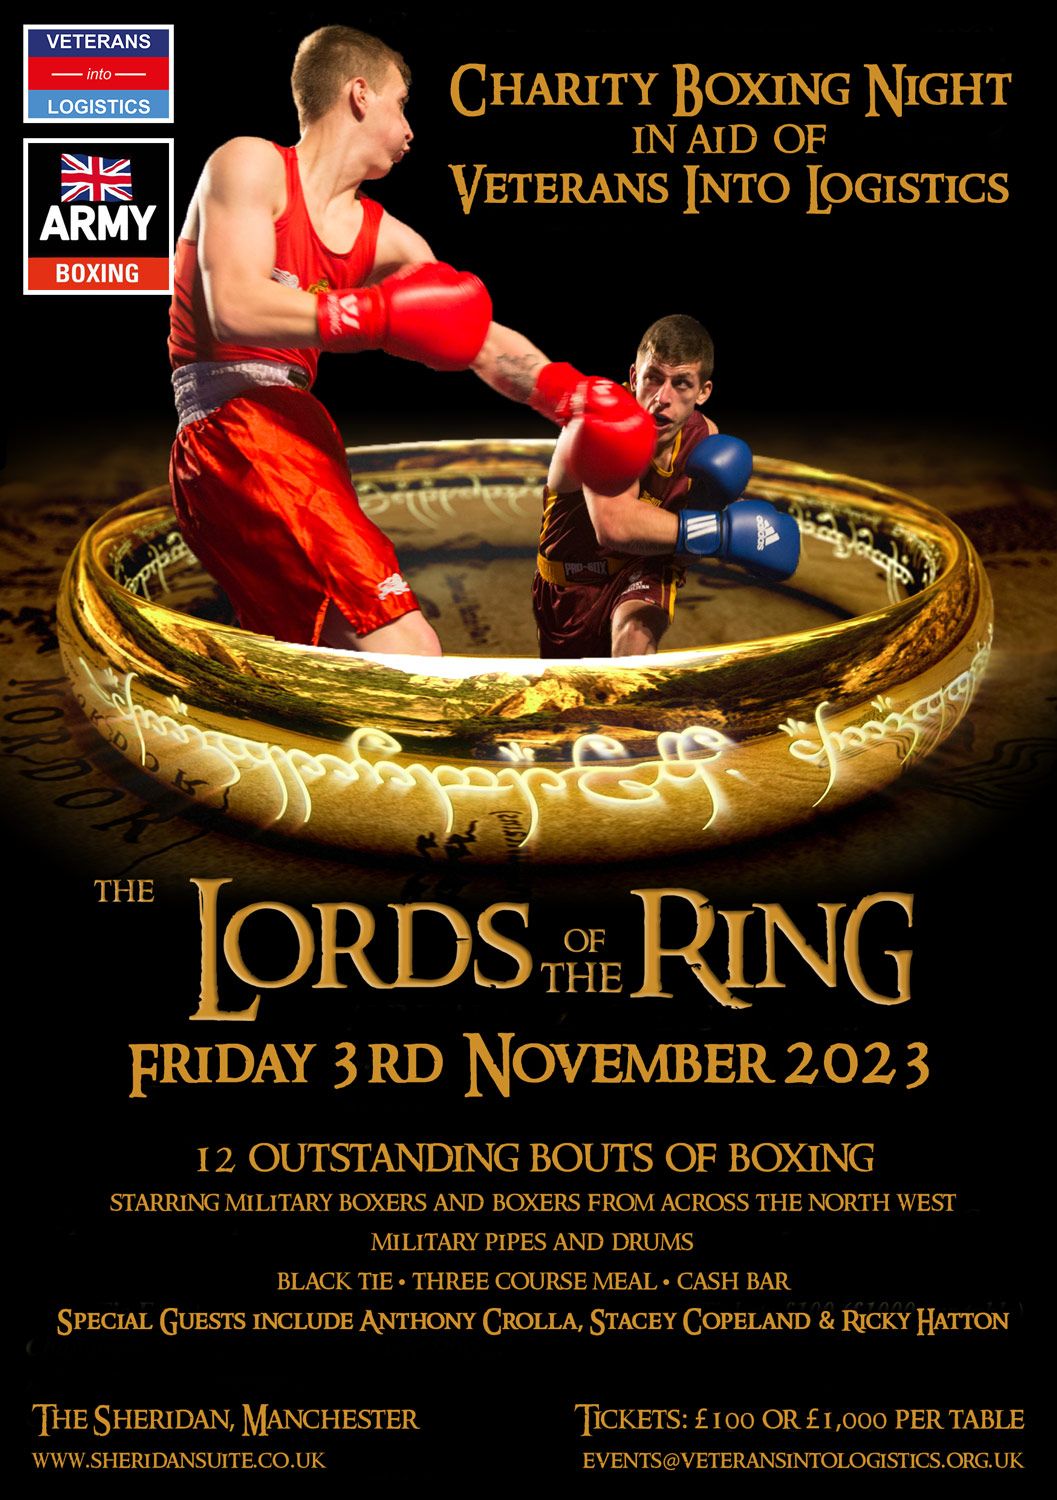 Charity Boxing Night in aid of Veterans into Logistics - 2024 DATE TO BE CONFIRMED